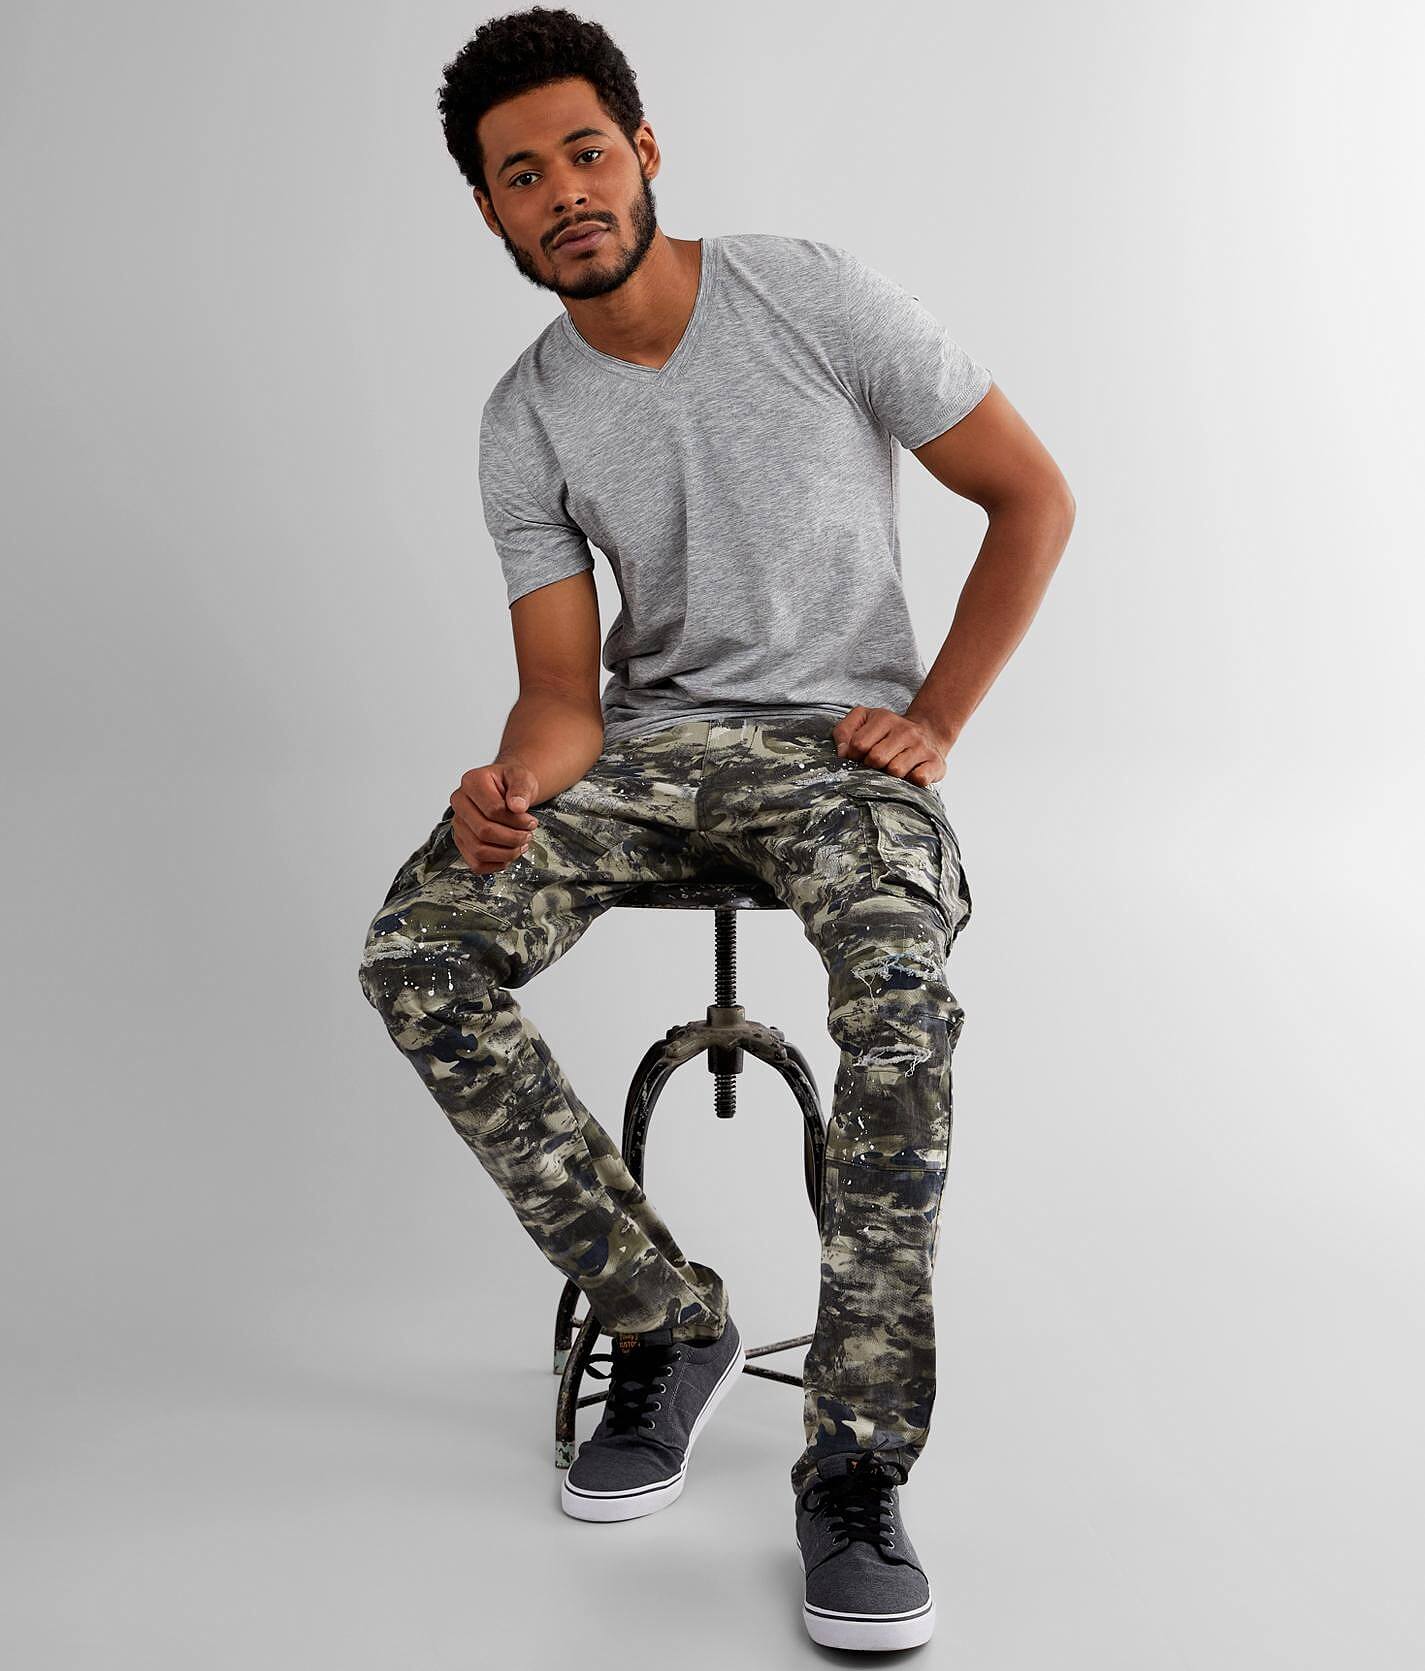 mens tapered camo pants